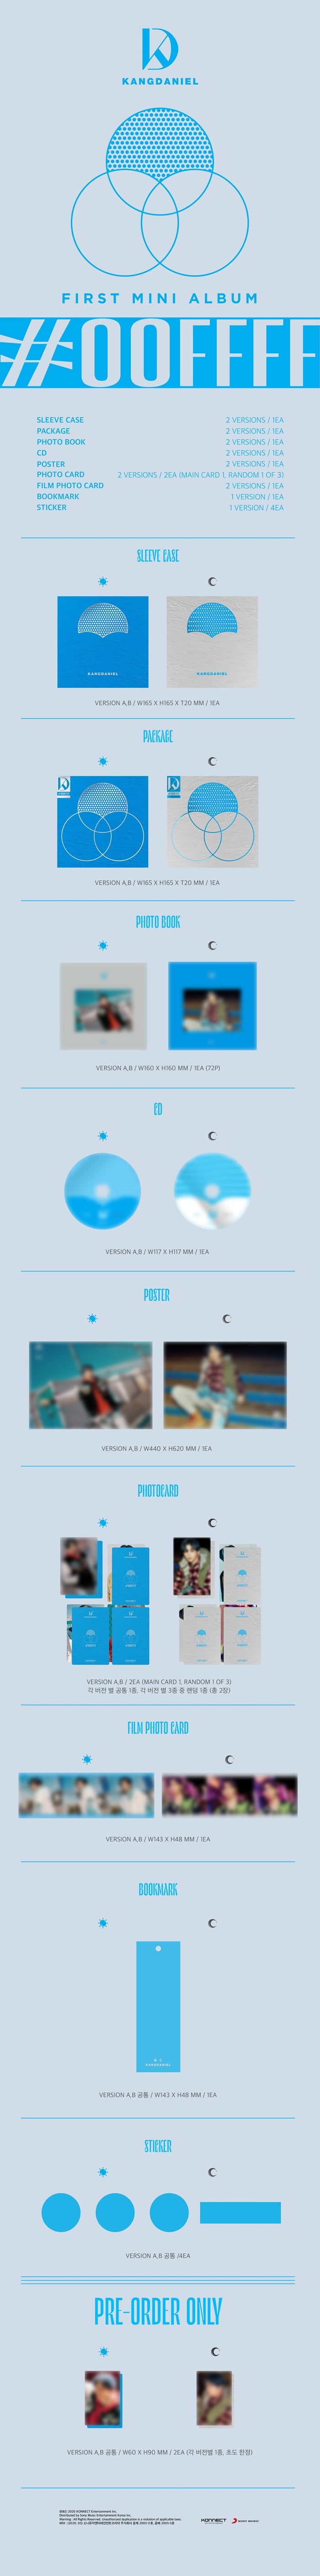 1 CD
1 Photo Book (72 pages)
1 Photo Card
1 Film Card
1 Bookmark
4 Stickers